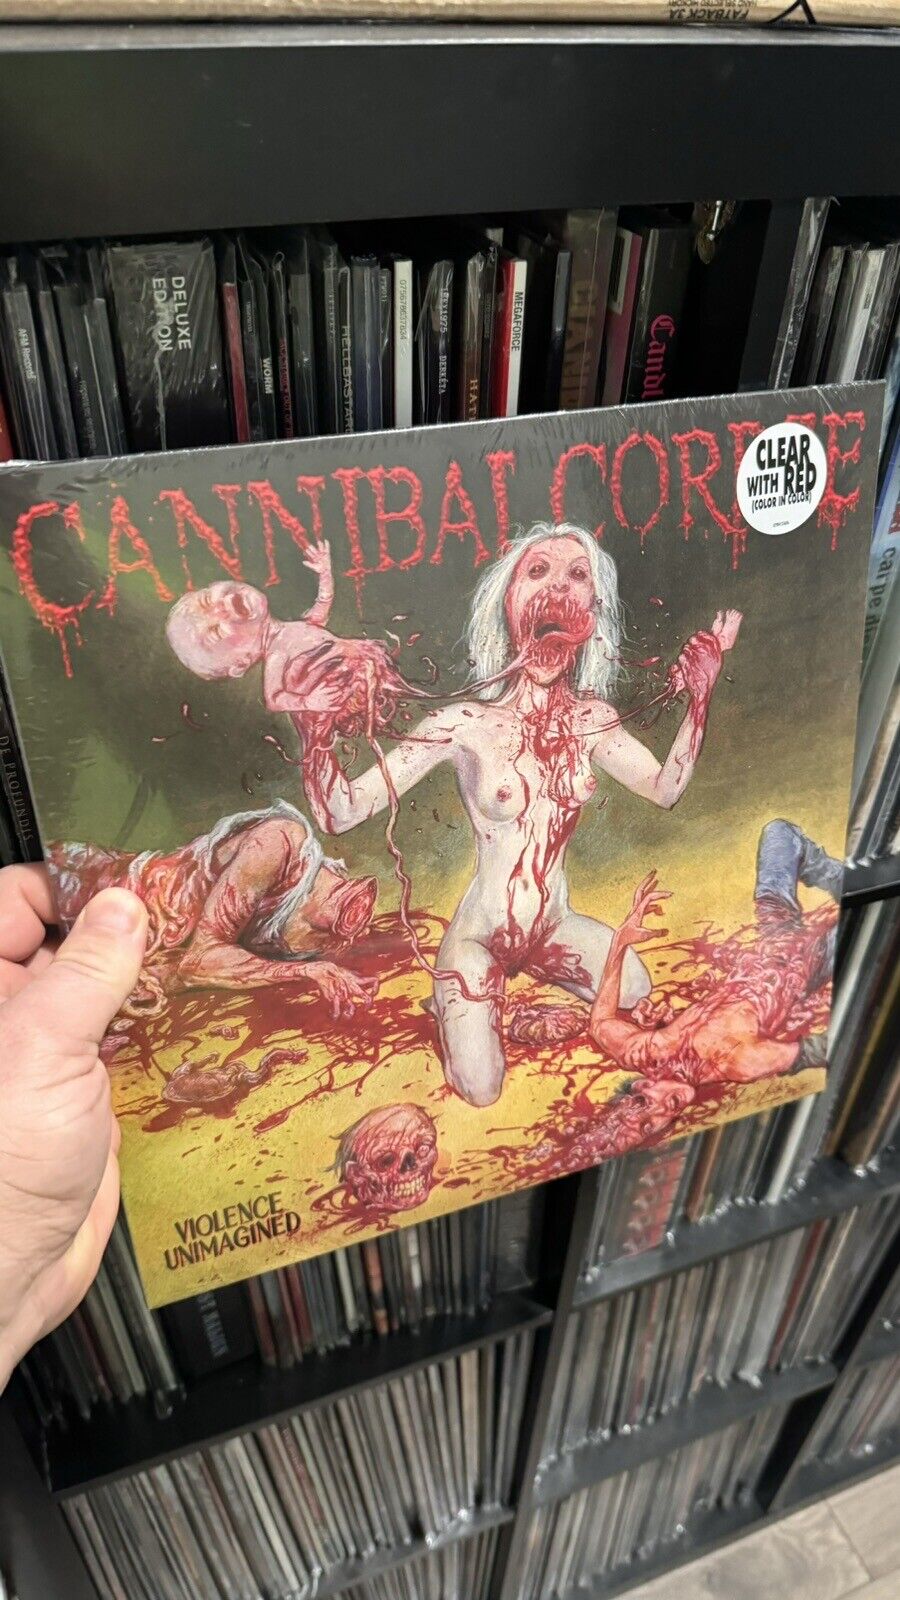 Cannibal Corpse Violence Unimagined LP Red/ Clear Vinyl  Alt Cover Art